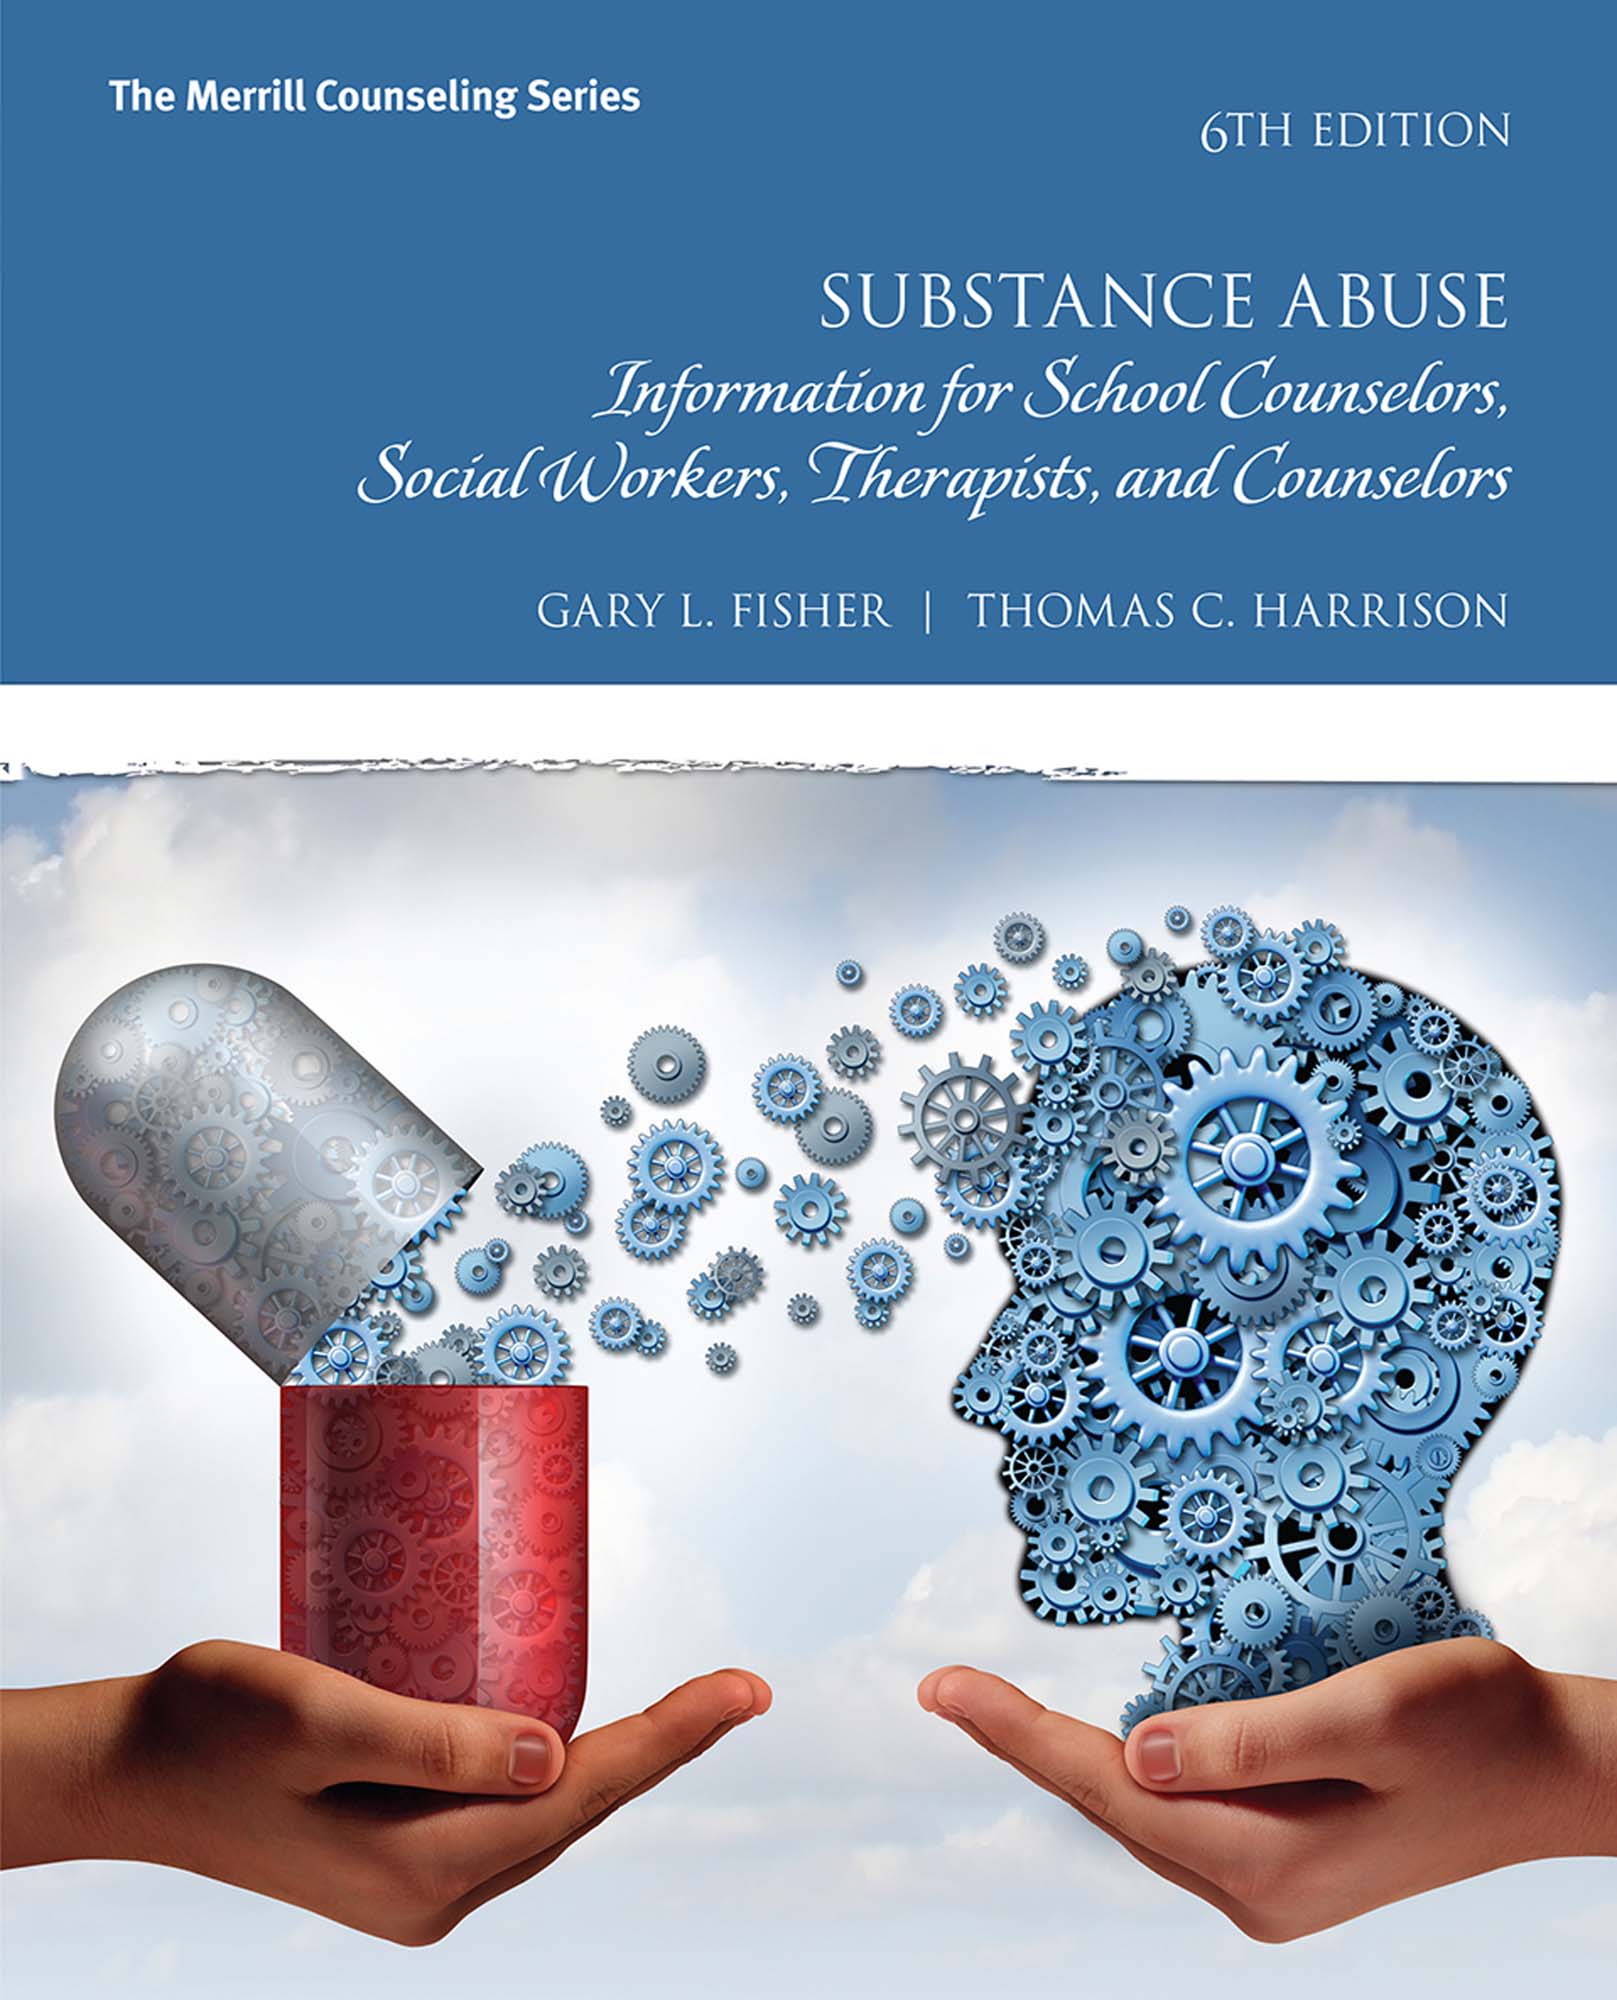 Substance Abuse: Information for School Counselors, Social Workers, Therapists and Counselors (6th Edition) - eBook